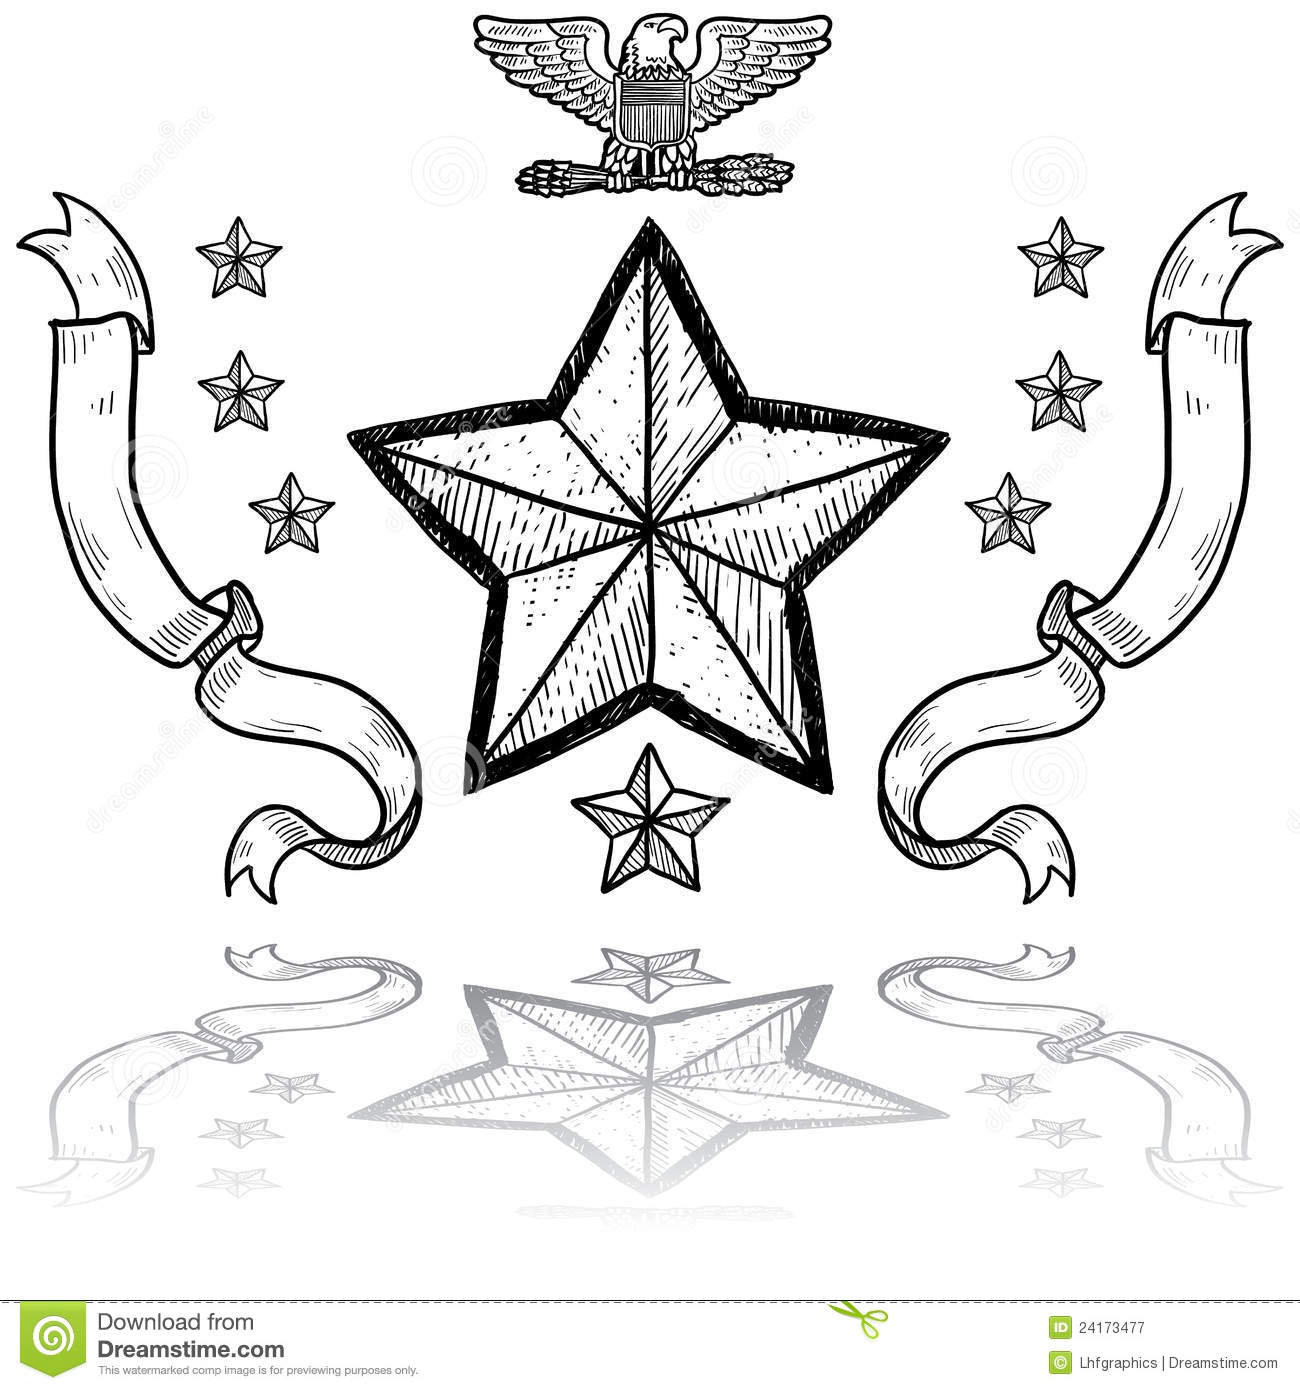 armed forces day coloring pages - Free Large Images